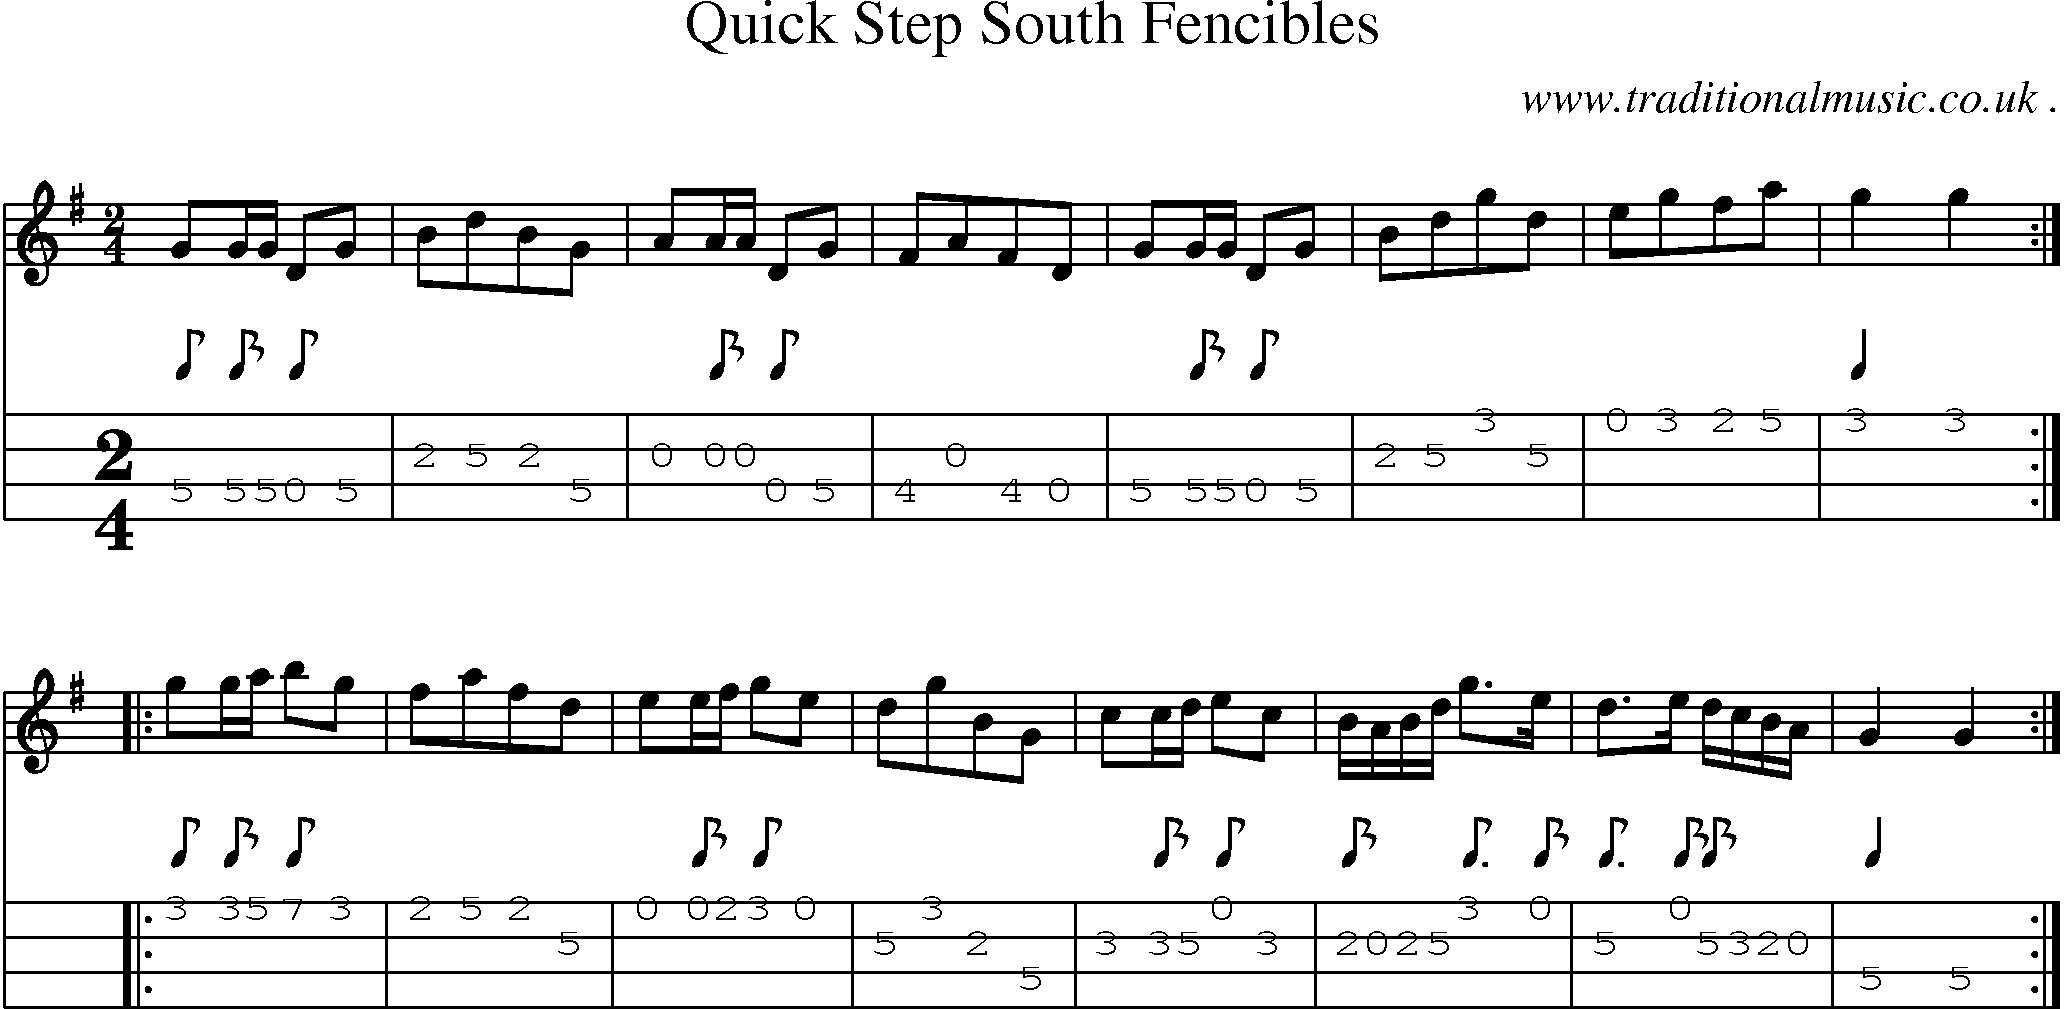 Sheet-music  score, Chords and Mandolin Tabs for Quick Step South Fencibles